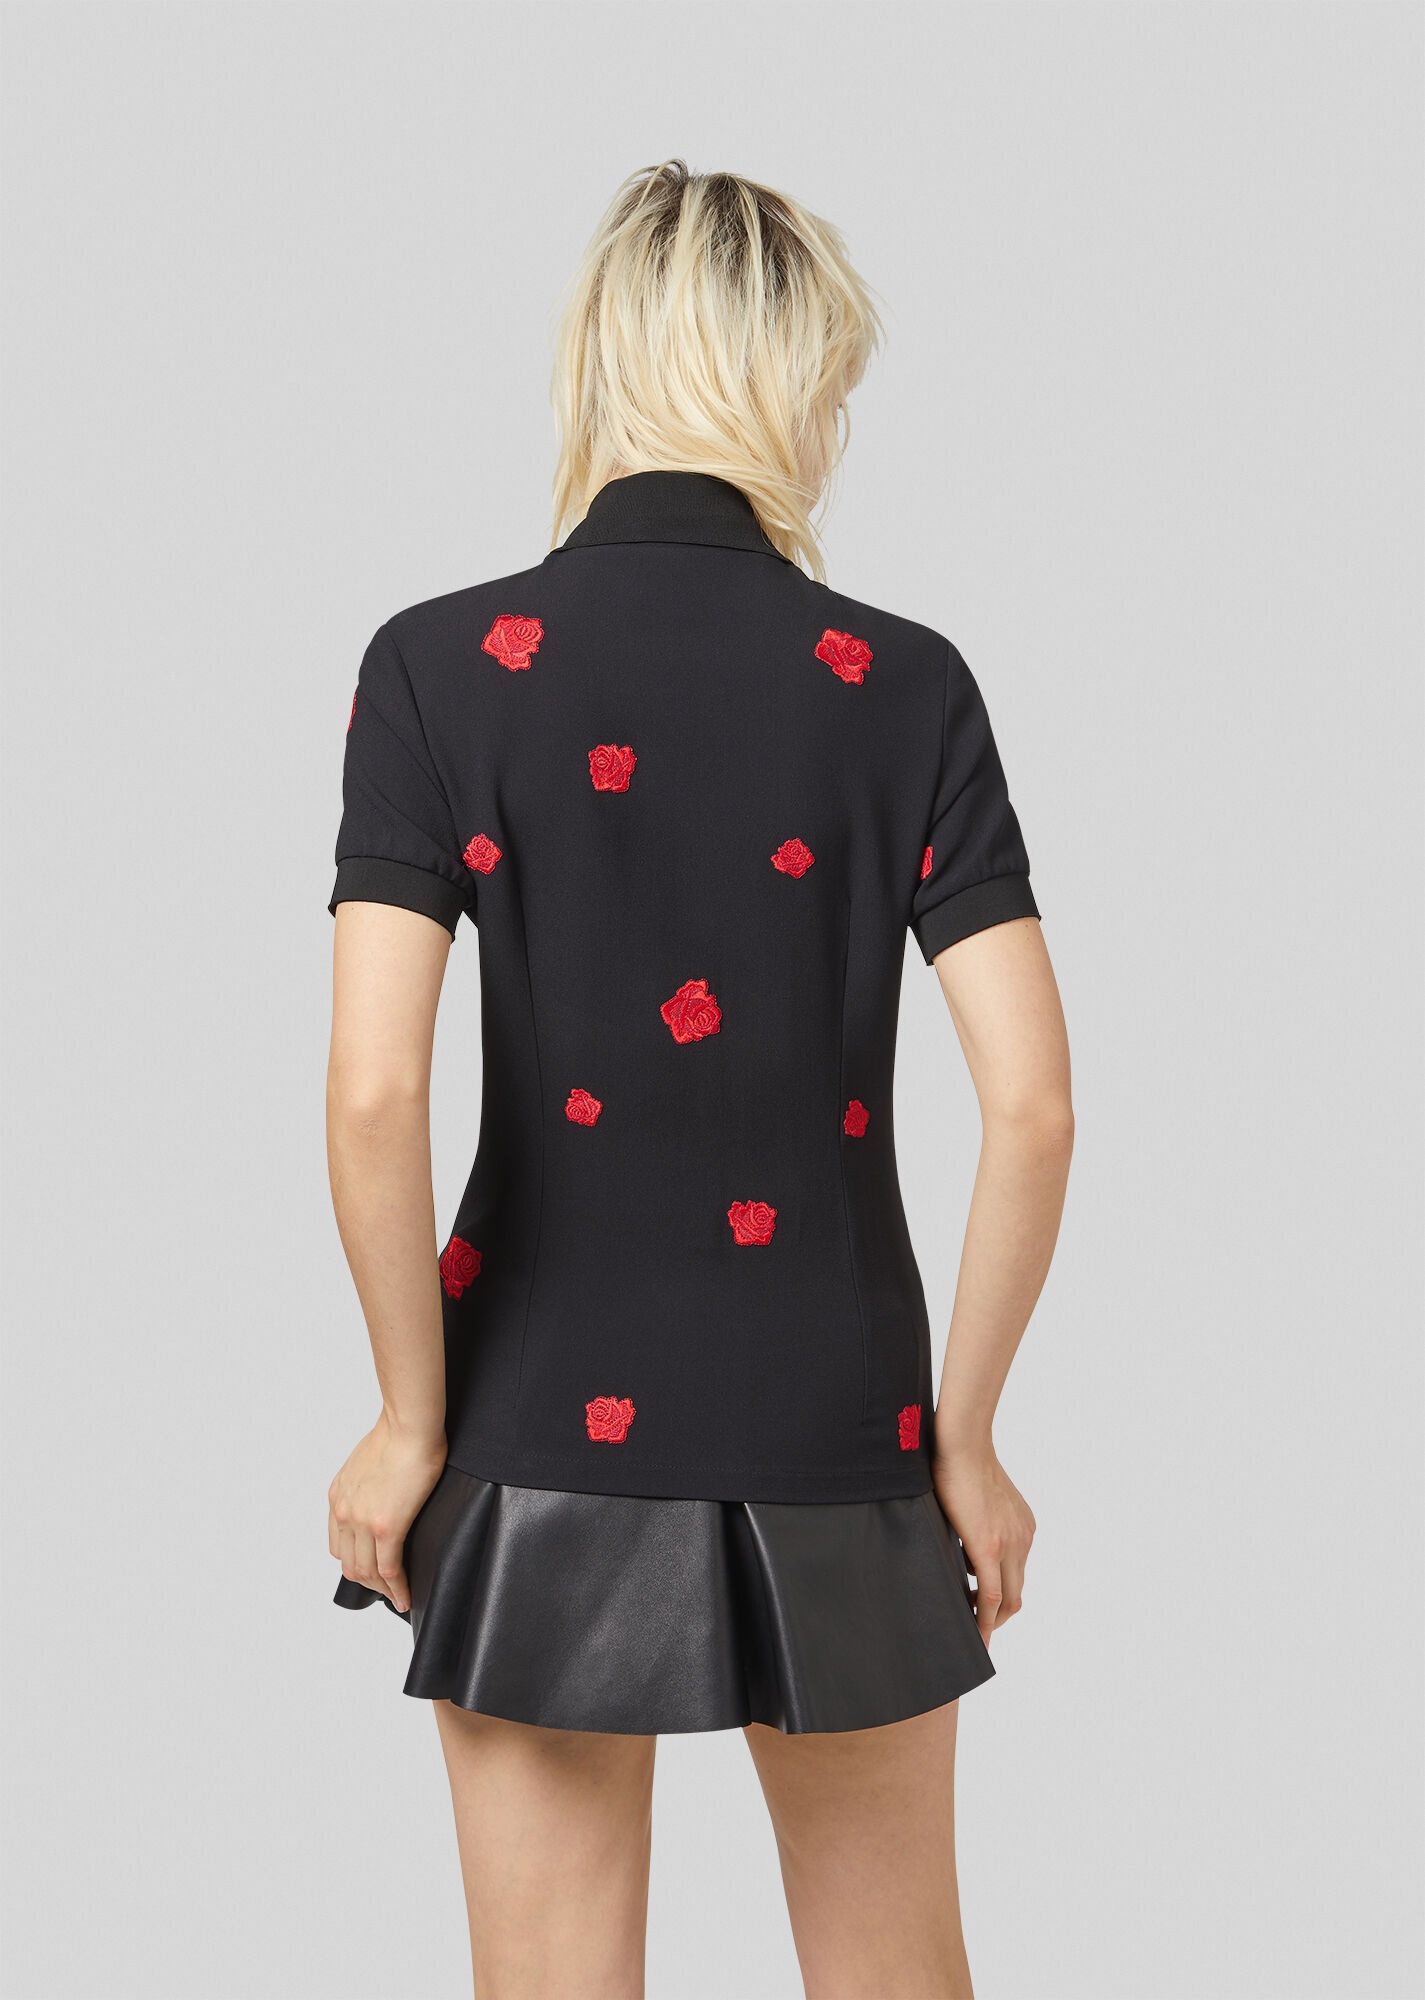 Embroidered Roses Polo Shirt - 4